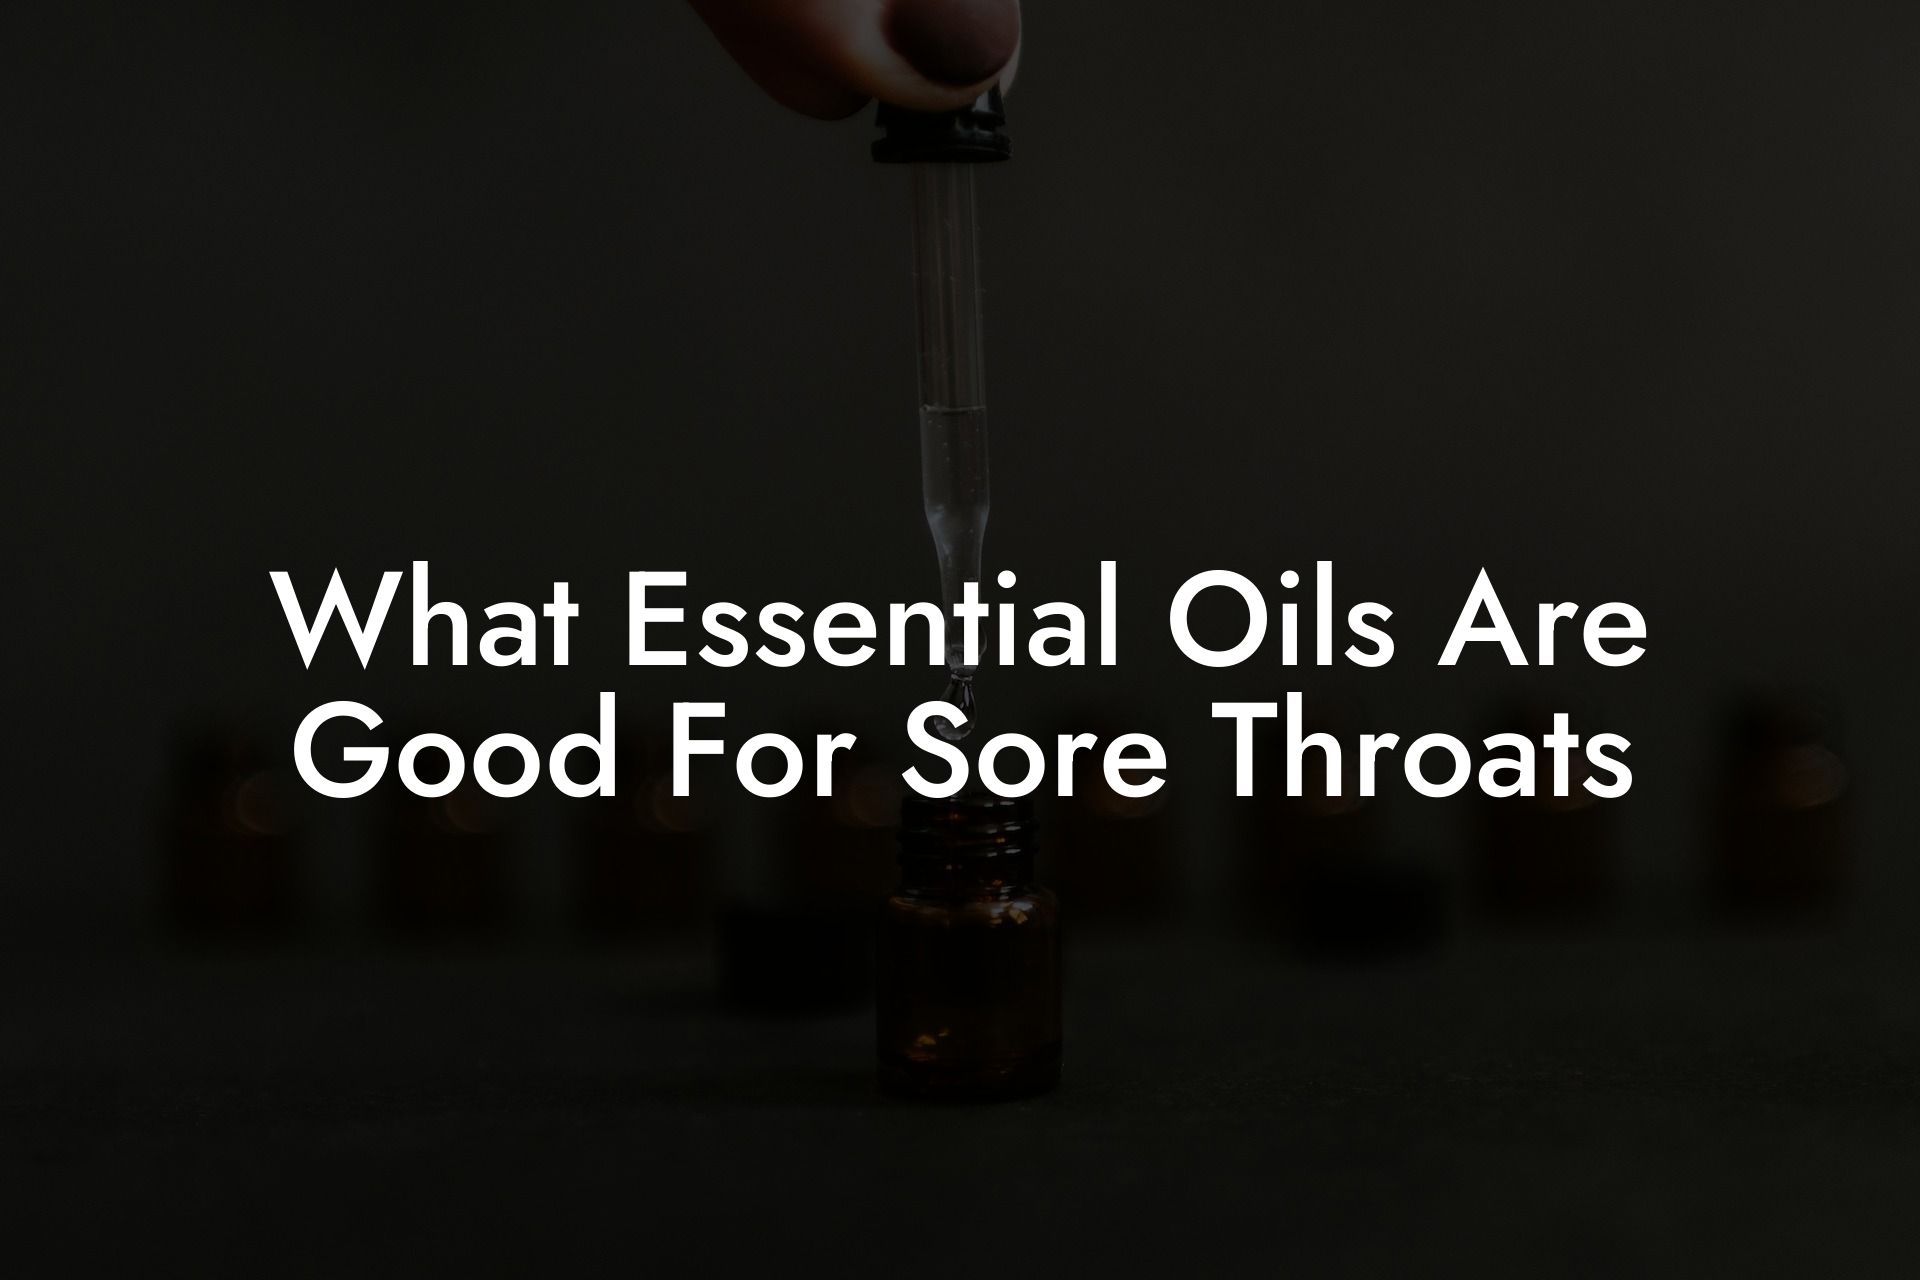 What Essential Oils Are Good For Sore Throats